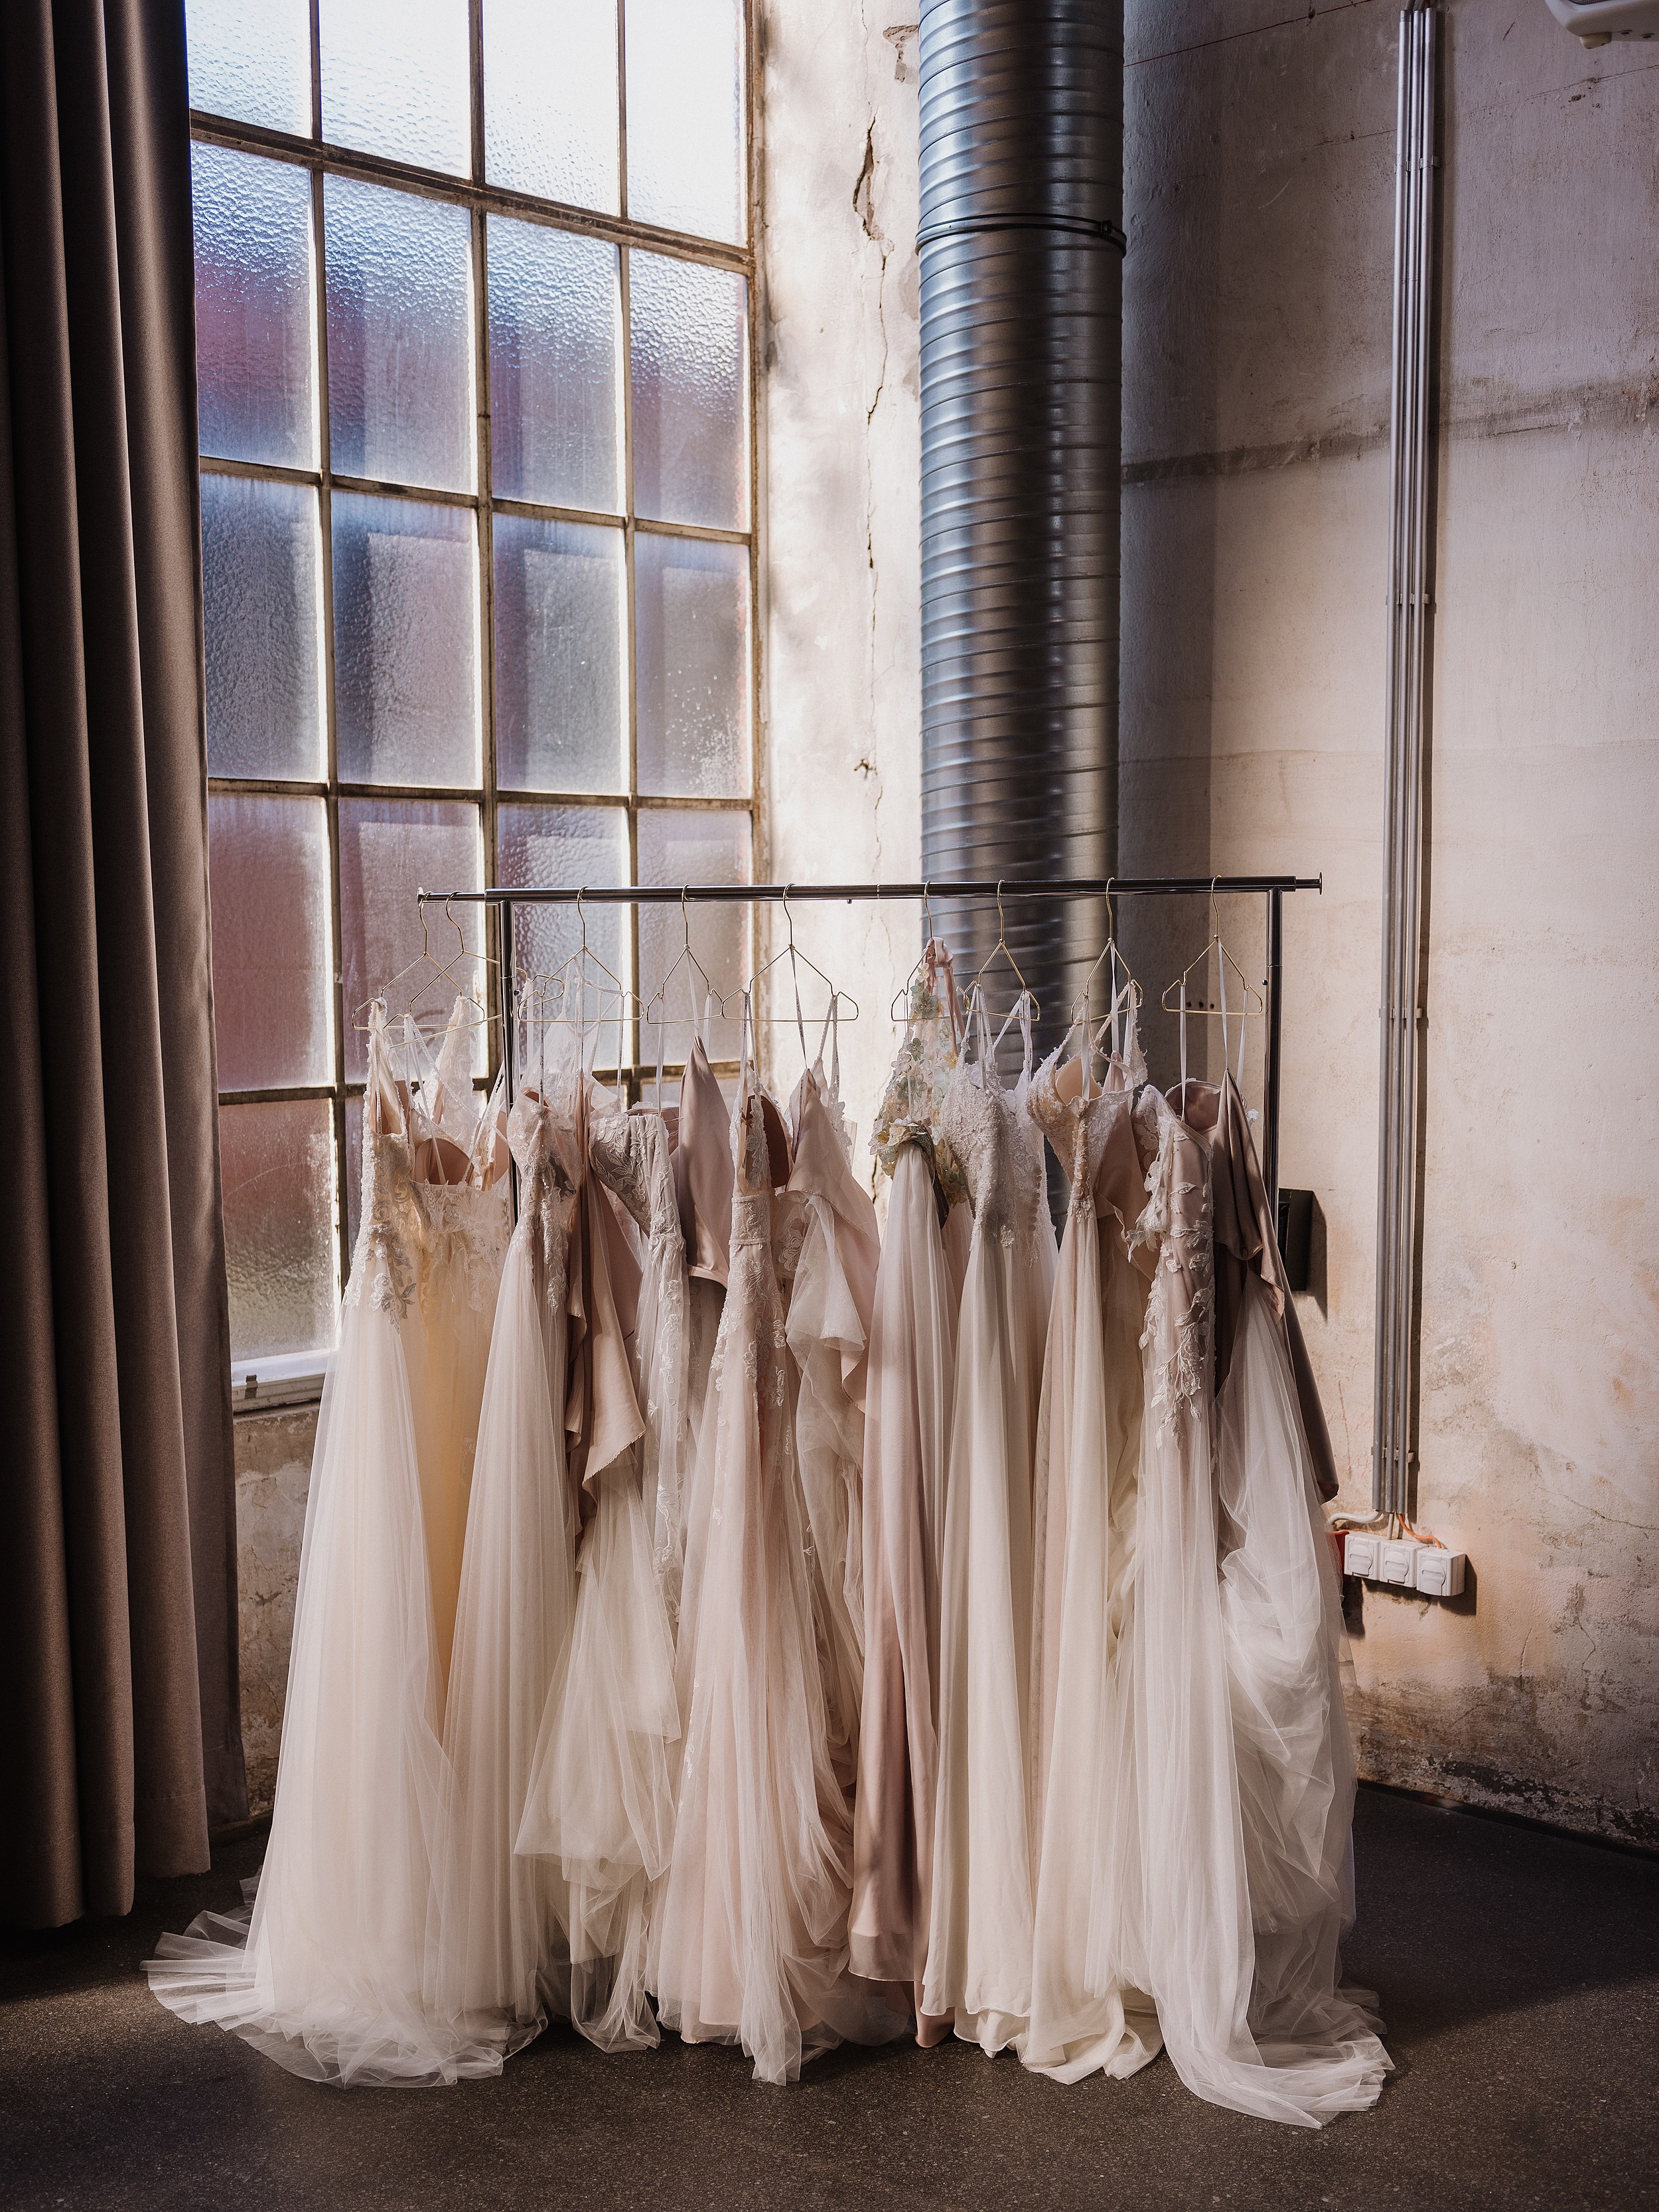 5 websites for buying or selling gorgeous used wedding dresses - Good  Morning America